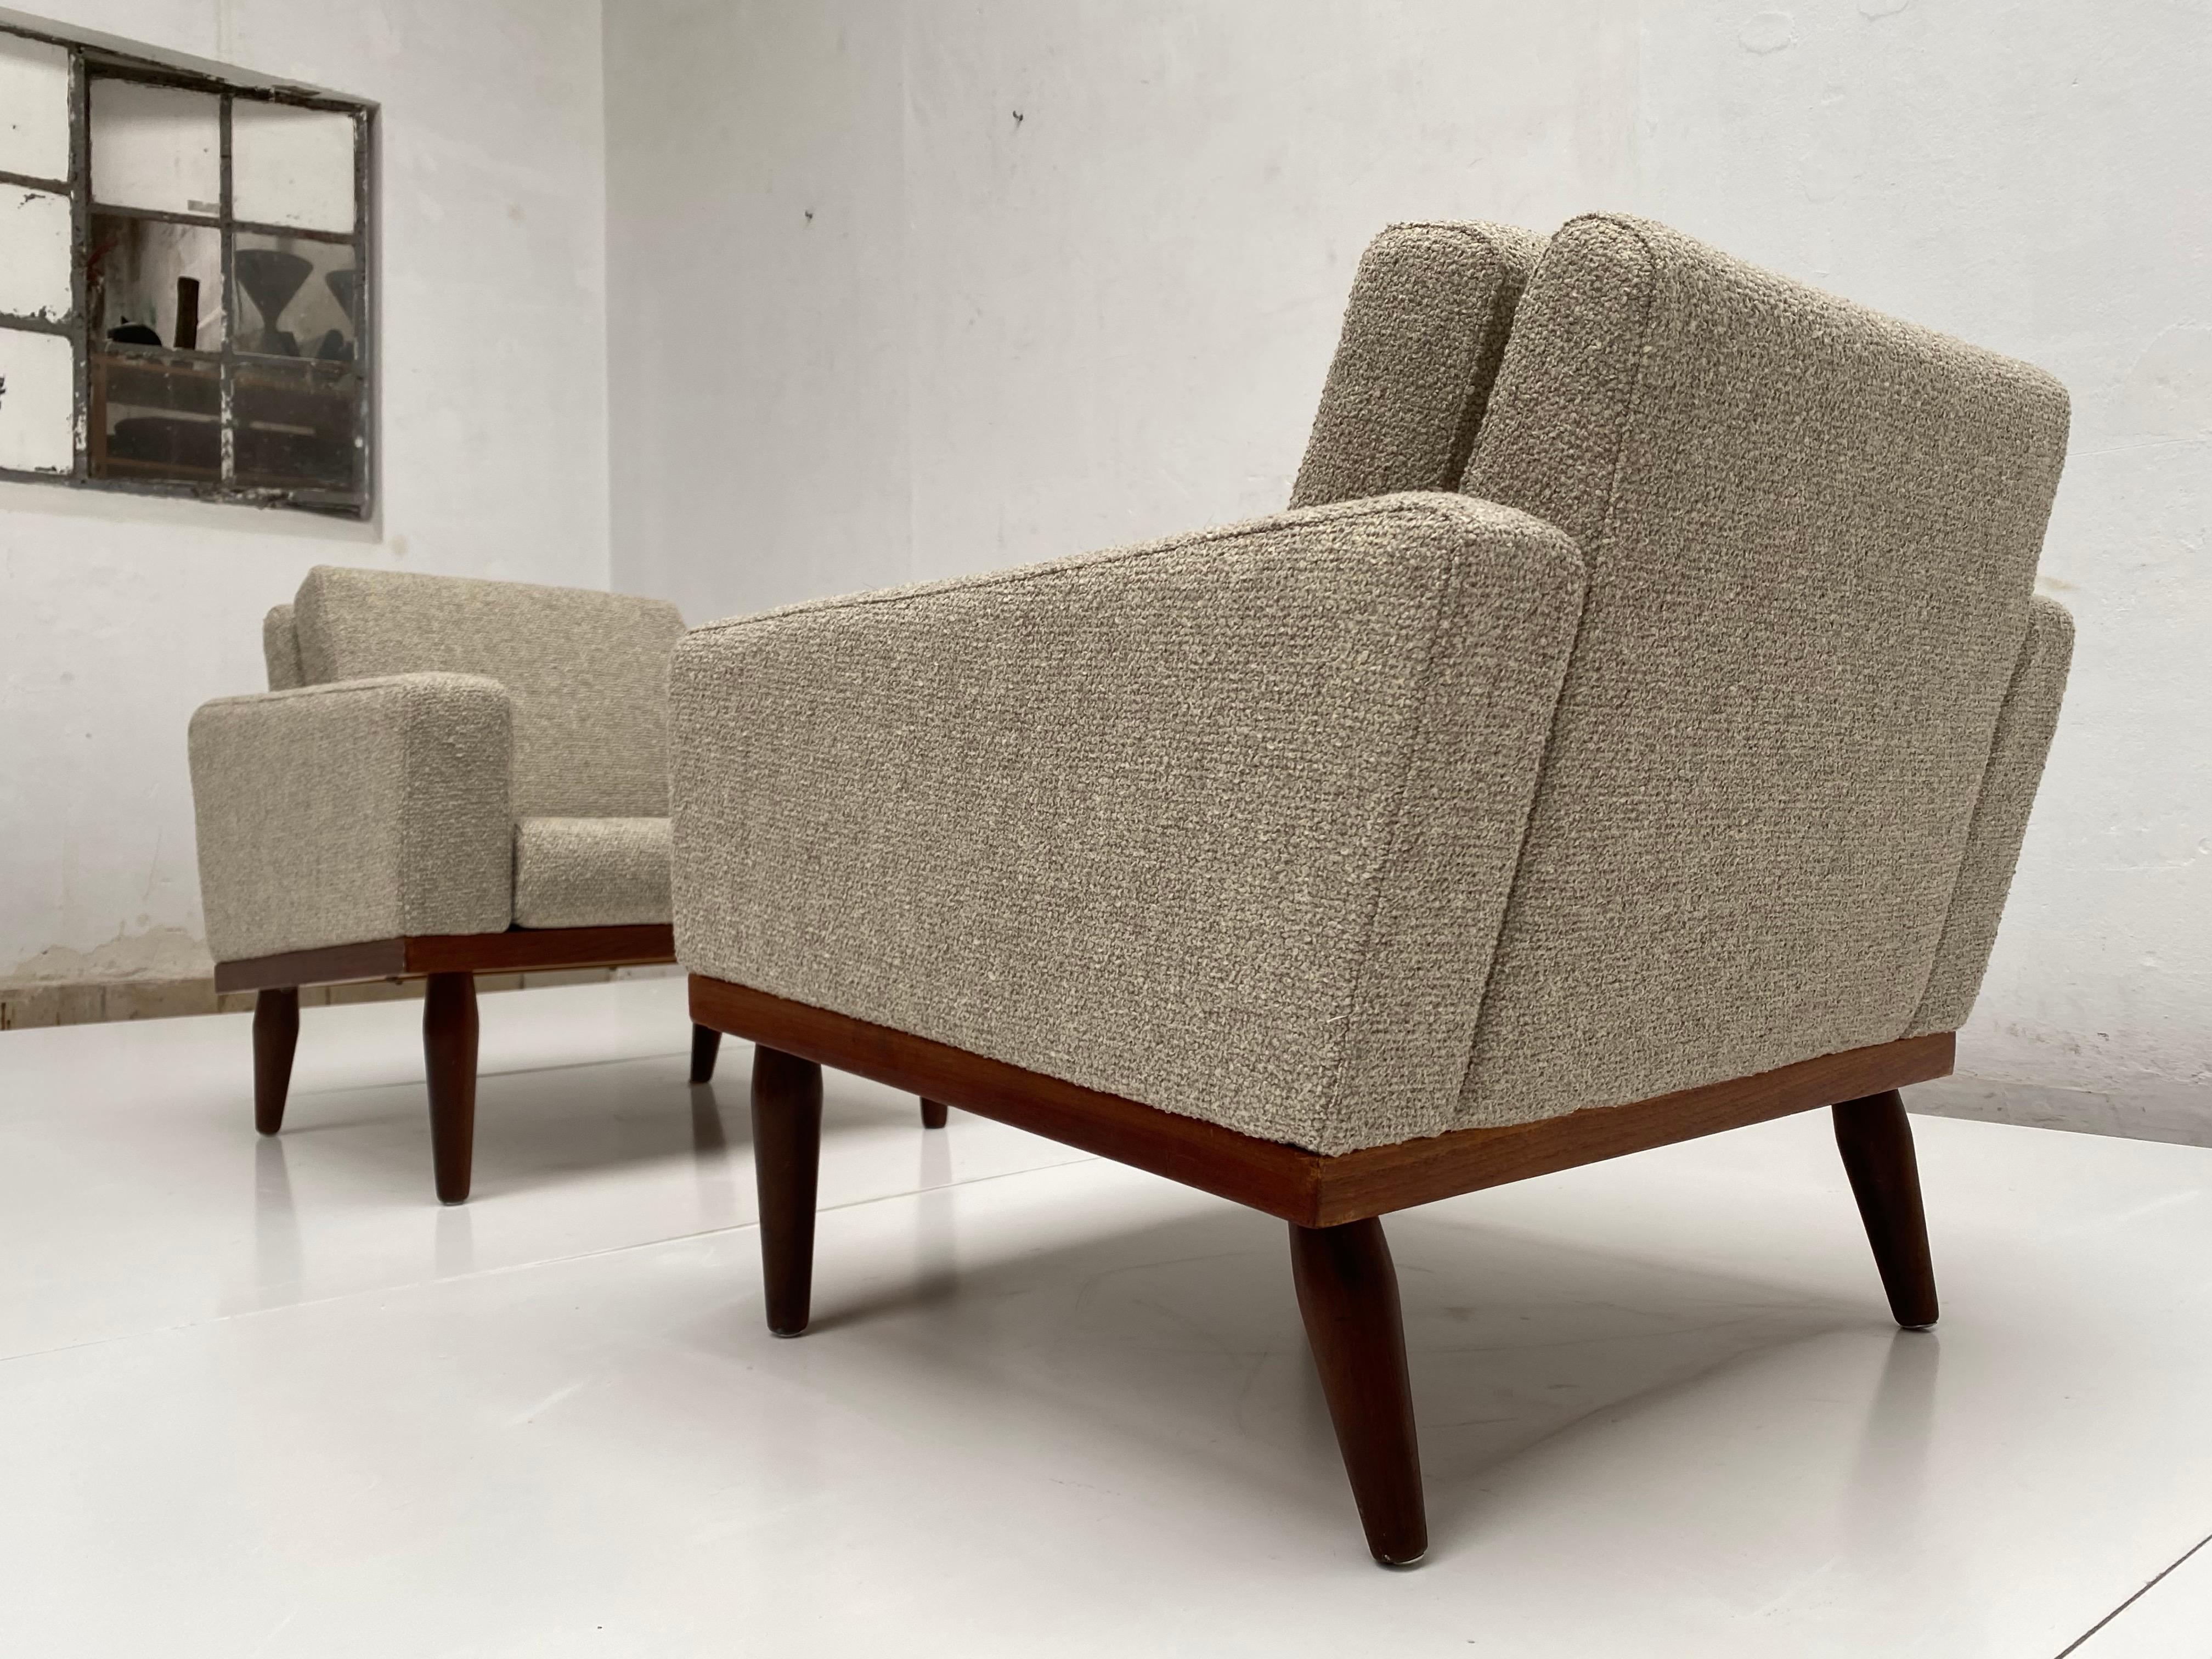 Great pair of new upholstered Danish lounge chairs marked Bovenkamp

Bovenkamp was a Dutch based company that imported Danish furniture by famous designers like Aksel Bender Madesen in the 1950s and 1960s

These chairs are a great example on how